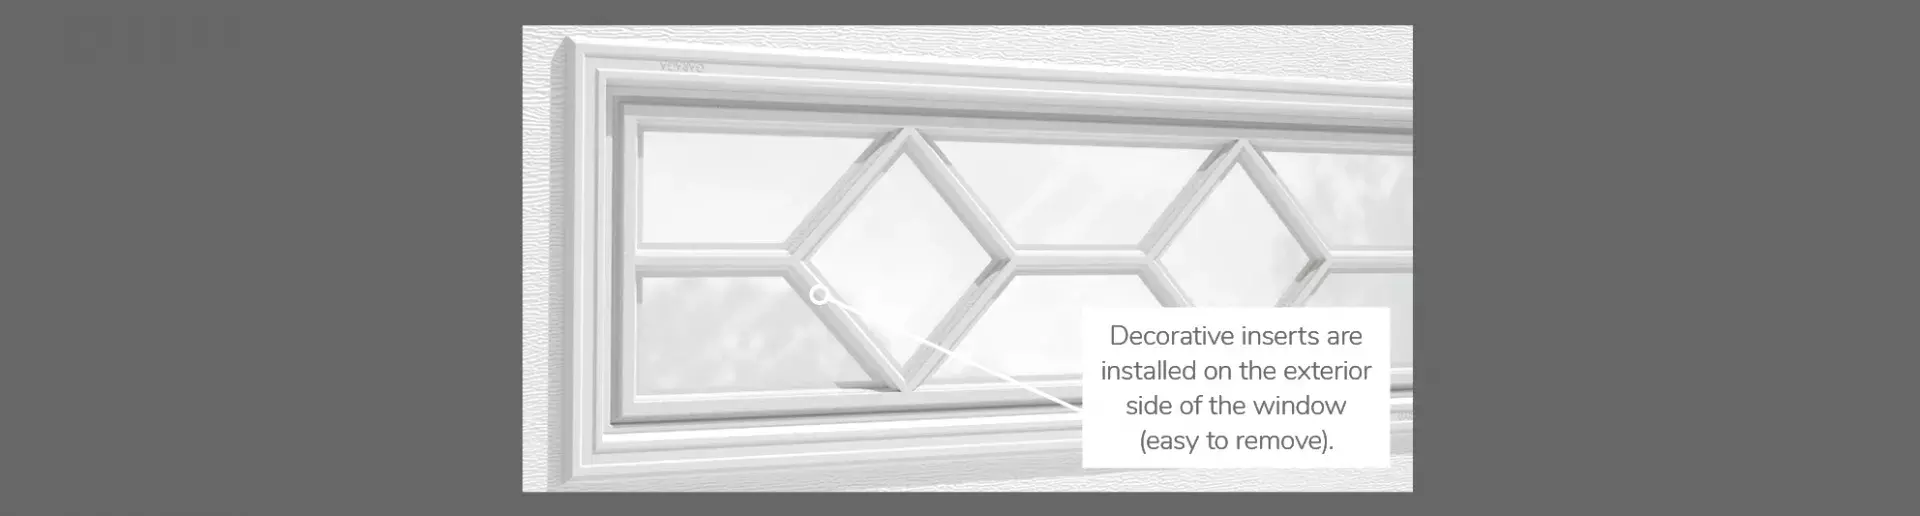 Waterton Decorative Insert, 41" x 16", available for door 3 layers - Polystyrene, 2 layers - Polystyrene and Non-insulated